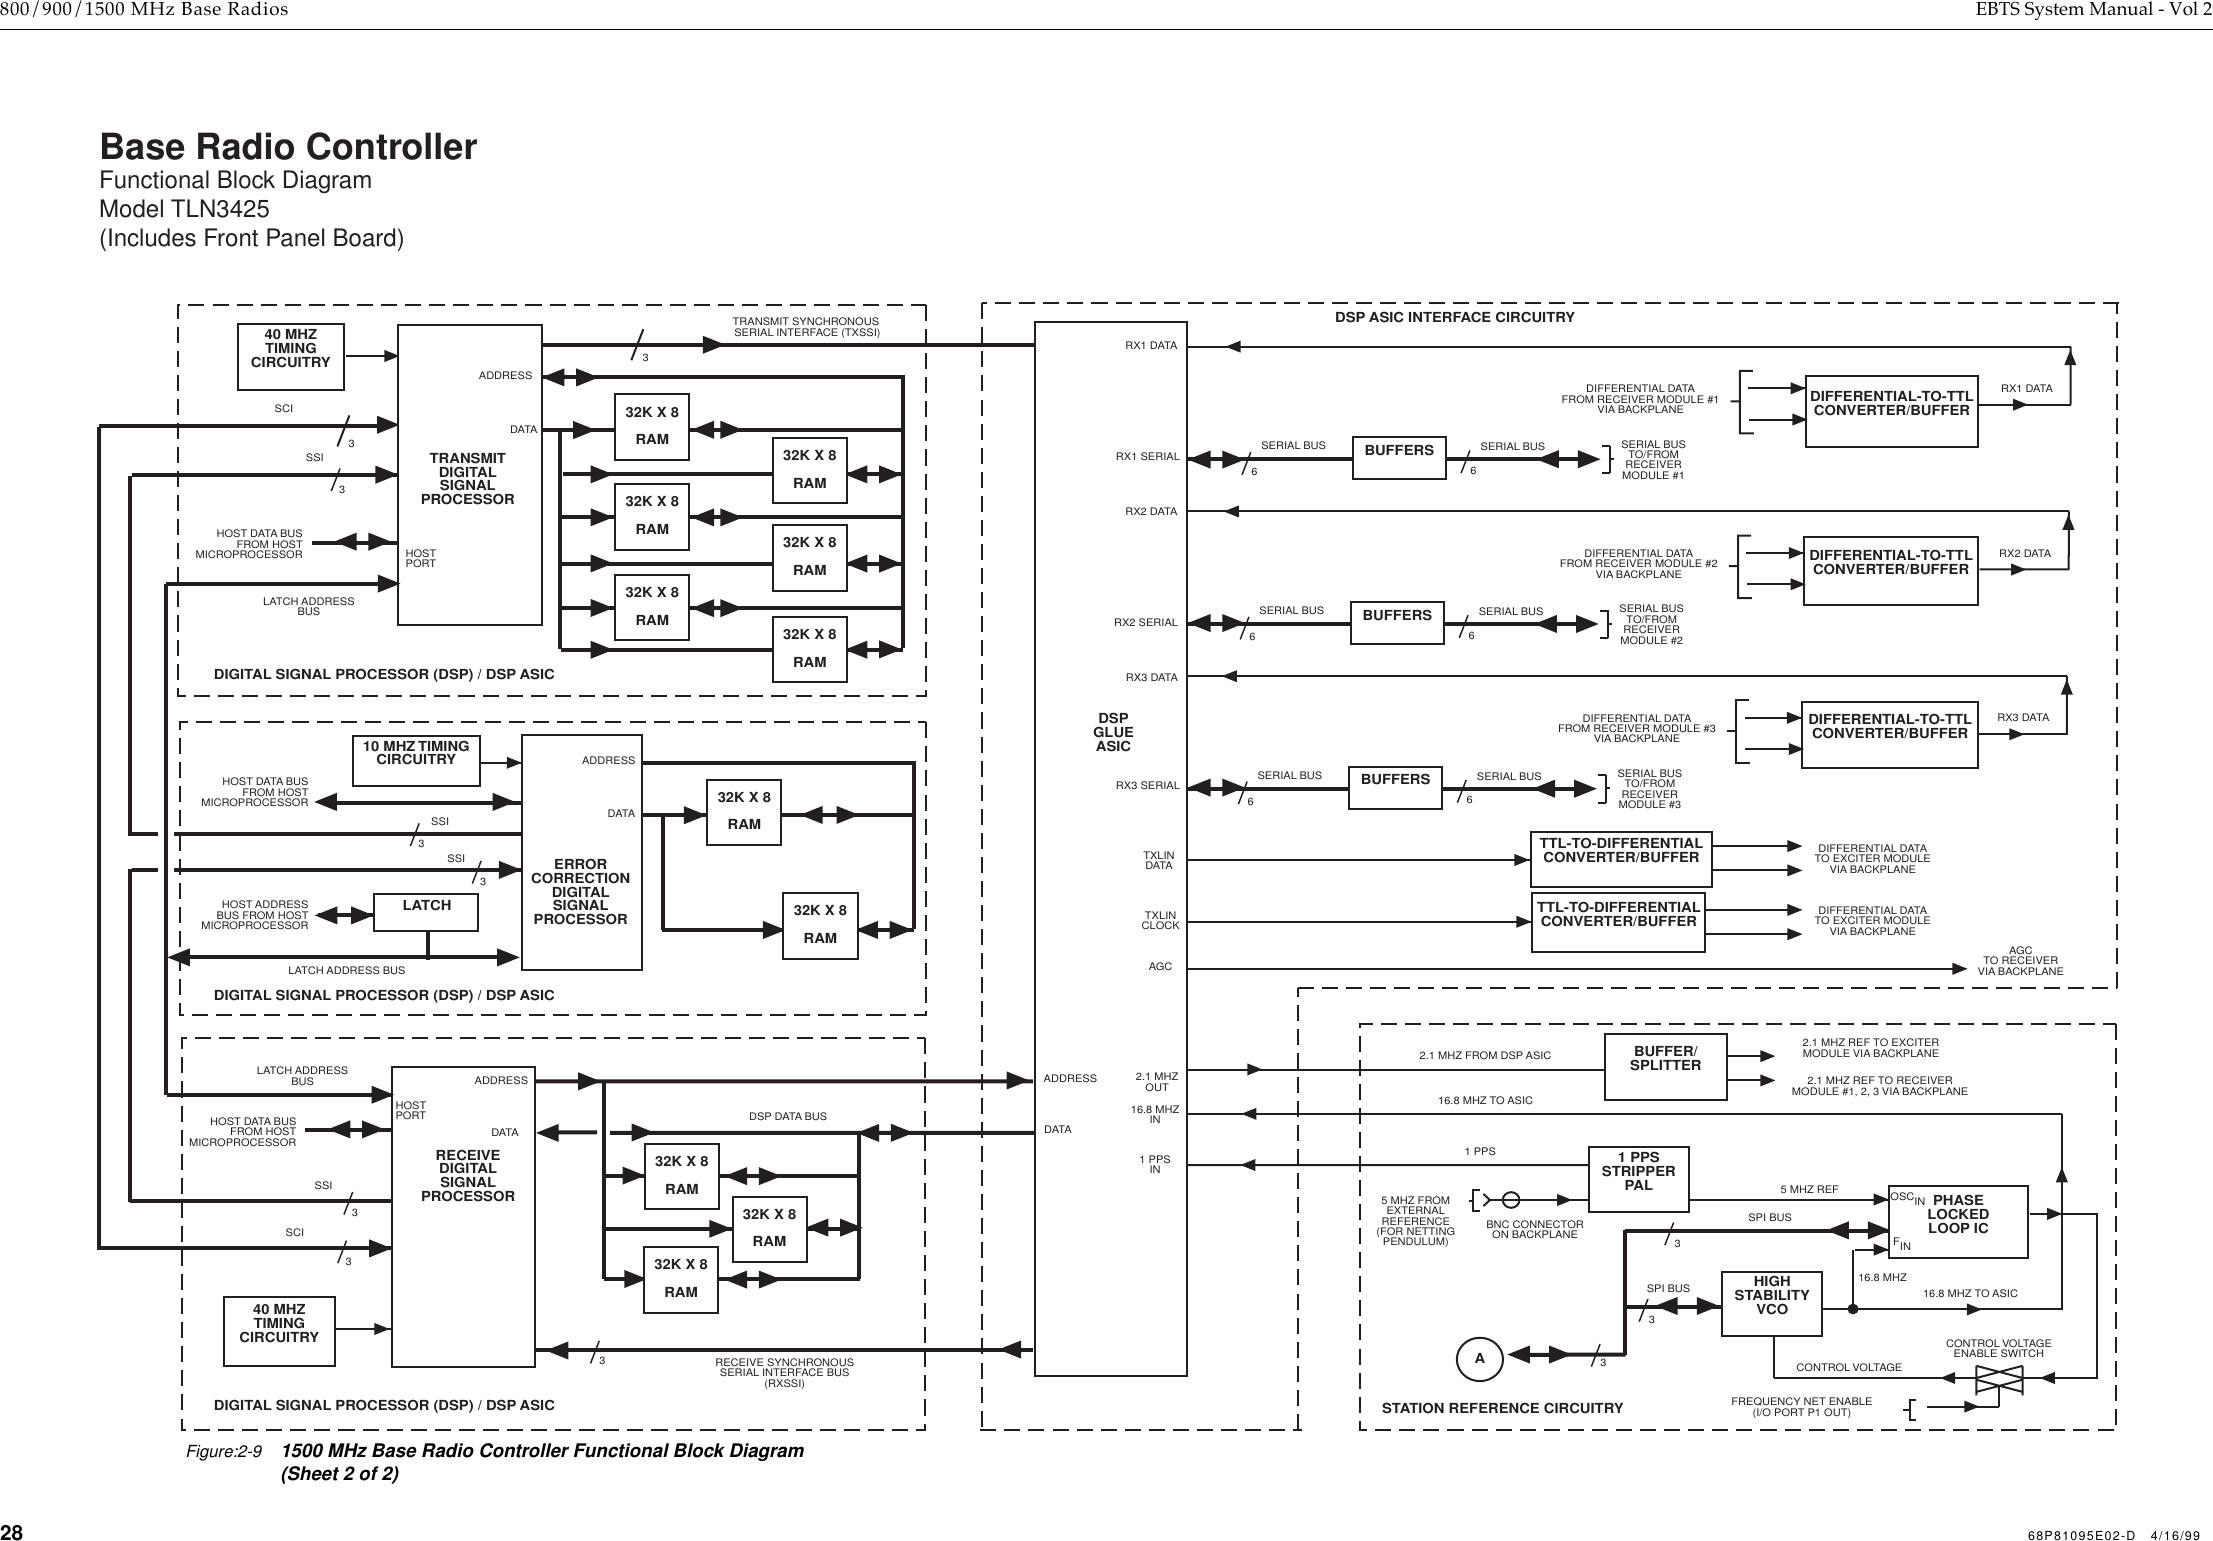  28 68P81095E02-D   4/16/99 800/900/1500 MHz Base Radios EBTS System Manual - Vol 2  Base Radio ControllerFunctional Block DiagramModel TLN3425(Includes Front Panel Board)HOST ADDRESSBUS FROM HOSTMICROPROCESSORLATCHERRORCORRECTIONDIGITALSIGNALPROCESSORDSP DATA BUS32K X 8RAM32K X 8RAM32K X 8RAMTRANSMIT SYNCHRONOUS SERIAL INTERFACE (TXSSI)332K X 8RAM32K X 8RAM 32K X 8RAM32K X 8RAM 32K X 8RAM32K X 8RAMSCI3SSI3DSP ASIC INTERFACE CIRCUITRYDSPGLUEASIC16.8 MHZIN2.1 MHZOUTRX1 DATARX1 SERIAL16.8 MHZ TO ASIC2.1 MHZ FROM DSP ASICRX2 DATARX2 SERIALRX3 DATARX3 SERIALSTATION REFERENCE CIRCUITRYPHASELOCKEDLOOP IC16.8 MHZ TO ASICCONTROL VOLTAGEENABLE SWITCHCONTROL VOLTAGEFREQUENCY NET ENABLE(I/O PORT P1 OUT)5 MHZ FROMEXTERNALREFERENCE(FOR NETTINGPENDULUM)5 MHZ REFSPI BUSBNC CONNECTORON BACKPLANE2.1 MHZ REF TO EXCITERMODULE VIA BACKPLANE2.1 MHZ REF TO RECEIVERMODULE #1, 2, 3 VIA BACKPLANESPI BUS 16.8 MHZFINOSCINHIGHSTABILITYVCO333DIGITAL SIGNAL PROCESSOR (DSP) / DSP ASICTRANSMITDIGITALSIGNALPROCESSORADDRESSDATASERIAL BUS SERIAL BUSDIFFERENTIAL DATAFROM RECEIVER MODULE #1VIA BACKPLANERX1 DATASERIAL BUSTO/FROMRECEIVERMODULE #166BUFFERSDIFFERENTIAL-TO-TTLCONVERTER/BUFFERSERIAL BUS SERIAL BUSDIFFERENTIAL DATAFROM RECEIVER MODULE #2VIA BACKPLANERX2 DATASERIAL BUSTO/FROMRECEIVERMODULE #266BUFFERSDIFFERENTIAL-TO-TTLCONVERTER/BUFFERSERIAL BUS SERIAL BUSDIFFERENTIAL DATAFROM RECEIVER MODULE #3VIA BACKPLANERX3 DATASERIAL BUSTO/FROMRECEIVERMODULE #366BUFFERSDIFFERENTIAL-TO-TTLCONVERTER/BUFFERDIFFERENTIAL DATATO EXCITER MODULEVIA BACKPLANETTL-TO-DIFFERENTIALCONVERTER/BUFFERDIFFERENTIAL DATATO EXCITER MODULEVIA BACKPLANETTL-TO-DIFFERENTIALCONVERTER/BUFFERABUFFER/SPLITTER1 PPSSTRIPPERPAL1 PPS1 PPSIN40 MHZTIMINGCIRCUITRYADDRESSDATADIGITAL SIGNAL PROCESSOR (DSP) / DSP ASICRECEIVEDIGITALSIGNALPROCESSORADDRESSDATA40 MHZTIMINGCIRCUITRYRECEIVE SYNCHRONOUSSERIAL INTERFACE BUS(RXSSI)3DIGITAL SIGNAL PROCESSOR (DSP) / DSP ASIC32K X 8RAM32K X 8RAMADDRESSDATAHOSTPORTLATCH ADDRESSBUSHOST DATA BUSFROM HOSTMICROPROCESSORHOST DATA BUSFROM HOSTMICROPROCESSORLATCH ADDRESSBUSSCISSI33HOSTPORTLATCH ADDRESS BUS10 MHZ TIMINGCIRCUITRYHOST DATA BUSFROM HOSTMICROPROCESSORSSI3SSI3AGCTO RECEIVERVIA BACKPLANEAGCTXLINDATATXLINCLOCKFigure:2-91500 MHz Base Radio Controller Functional Block Diagram (Sheet 2 of 2)